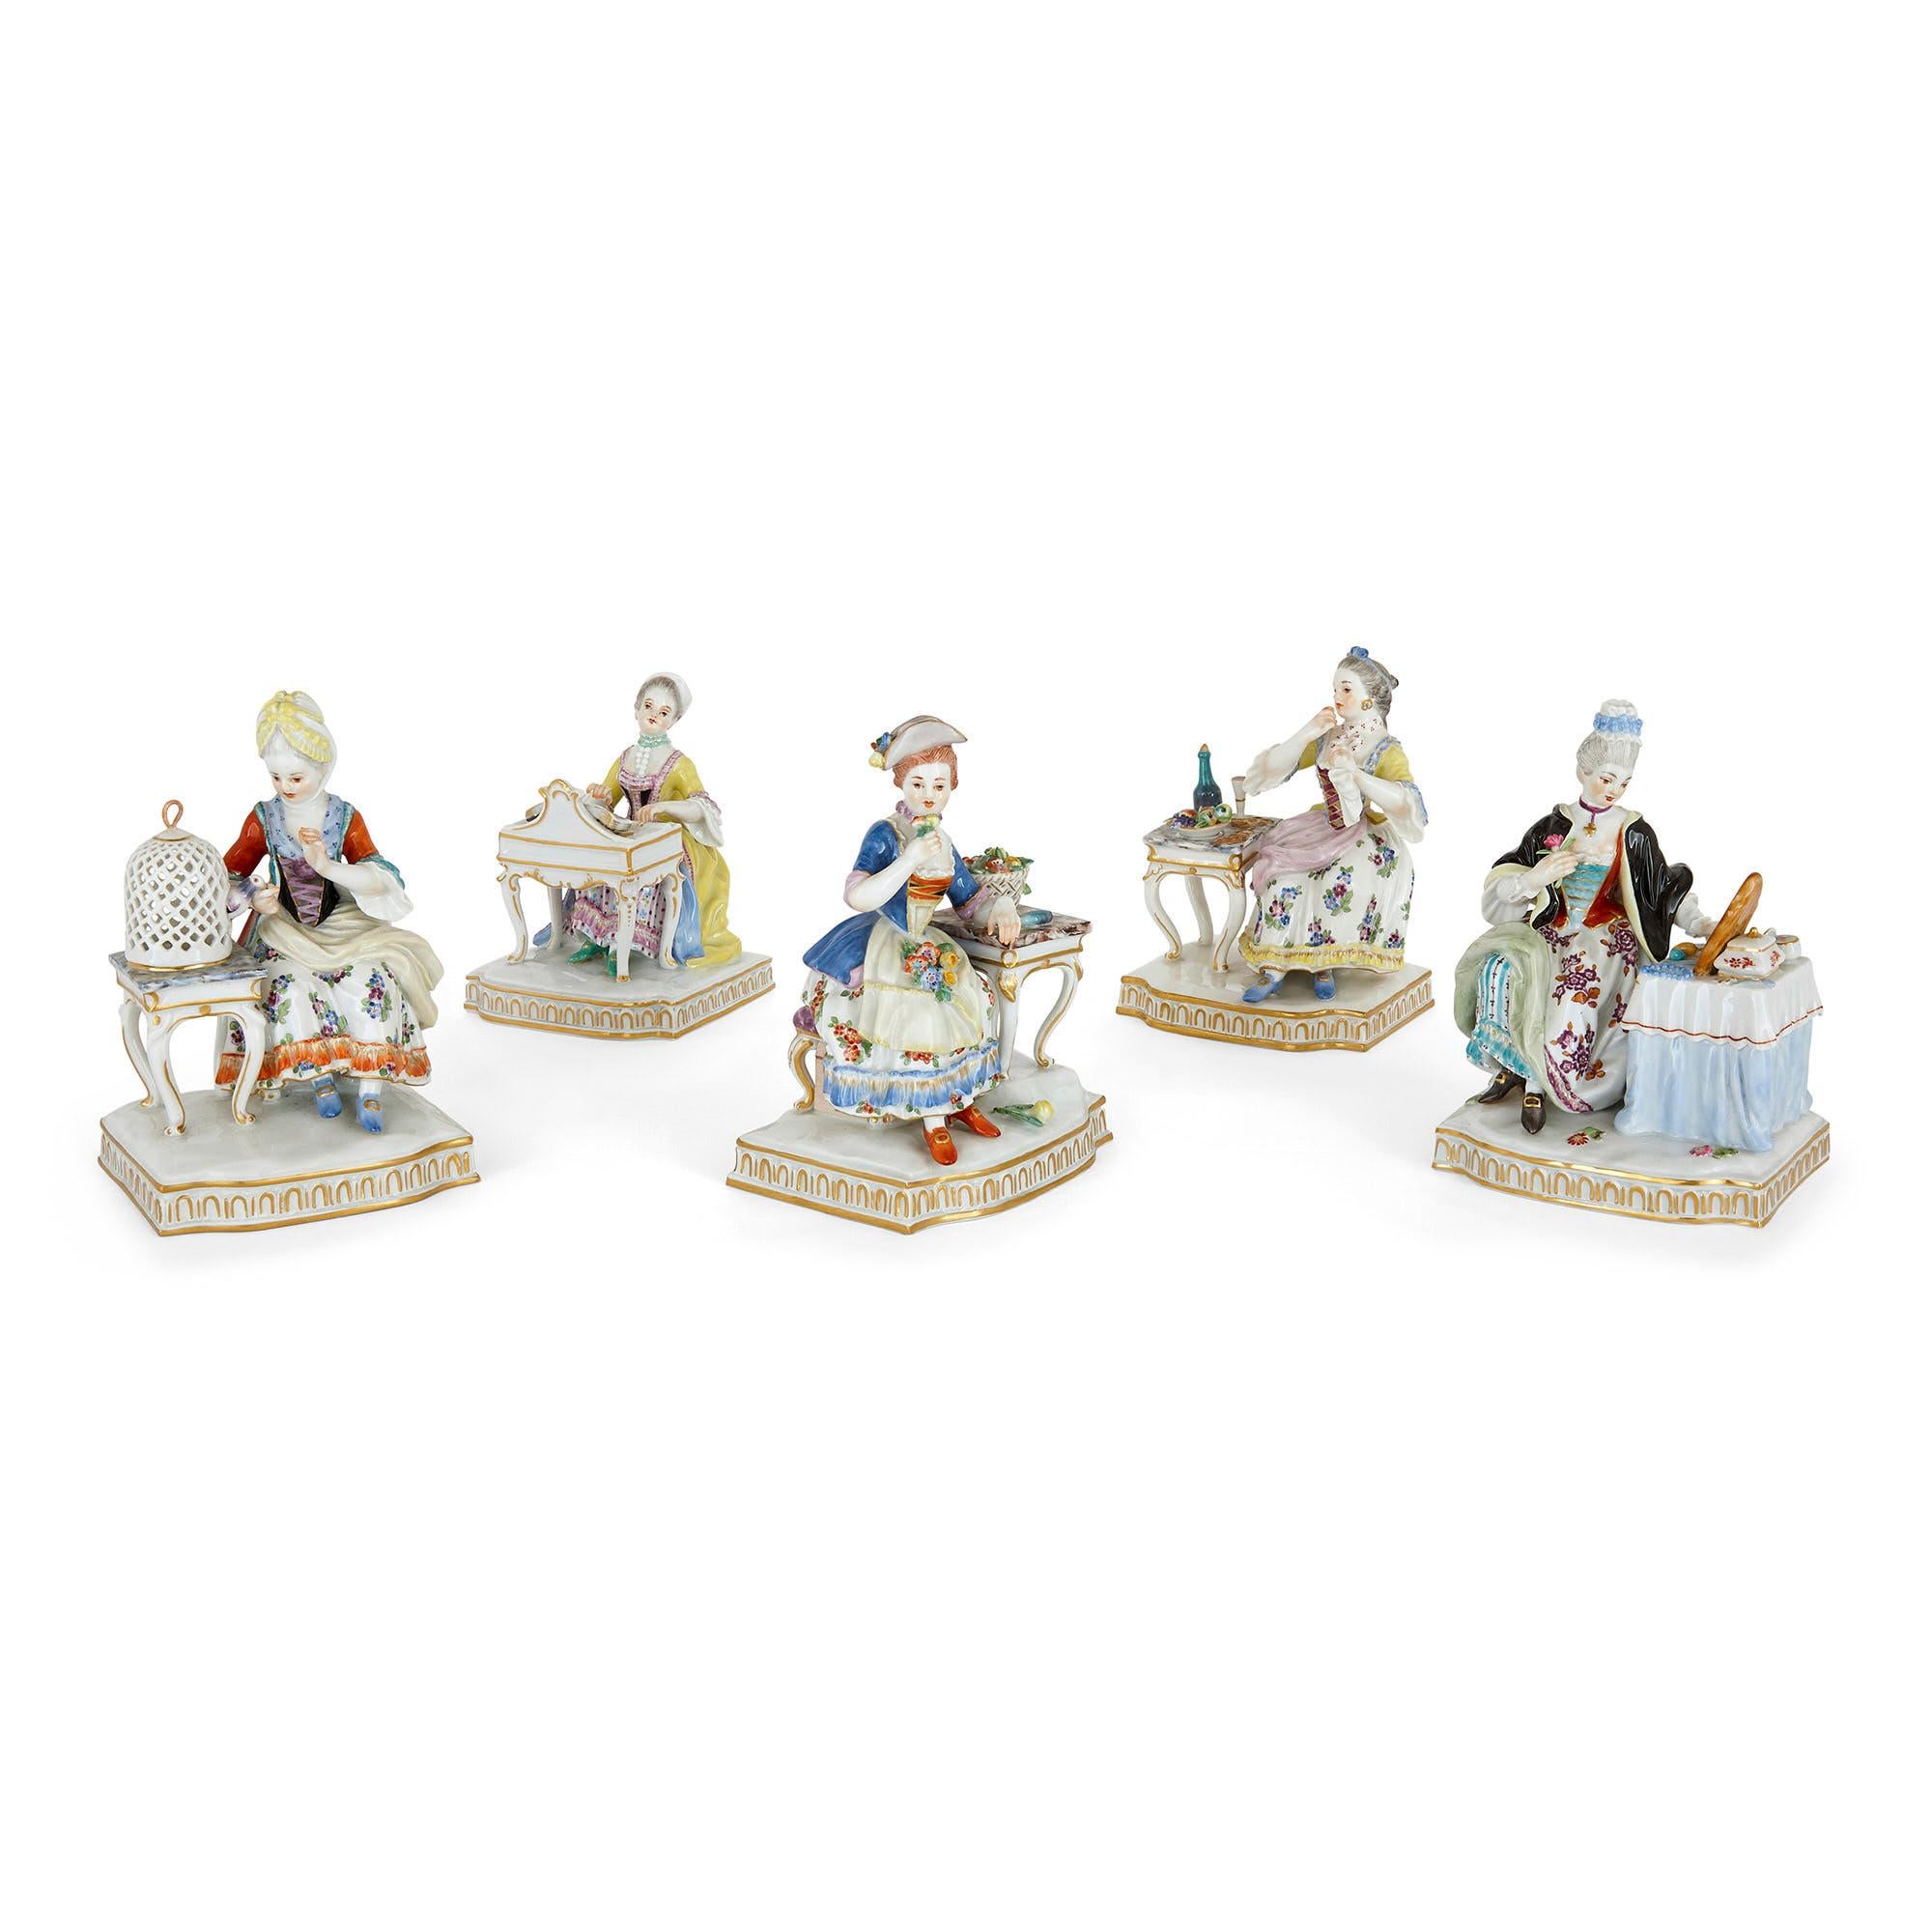 Set of five allegorical porcelain sculptures by Meissen
German, c. 1975
Measures: Height 15cm, width 10cm, depth 8.5cm

The five figures in this set are allegorical of the senses: the woman portrayed in each piece enacts one of the five senses: